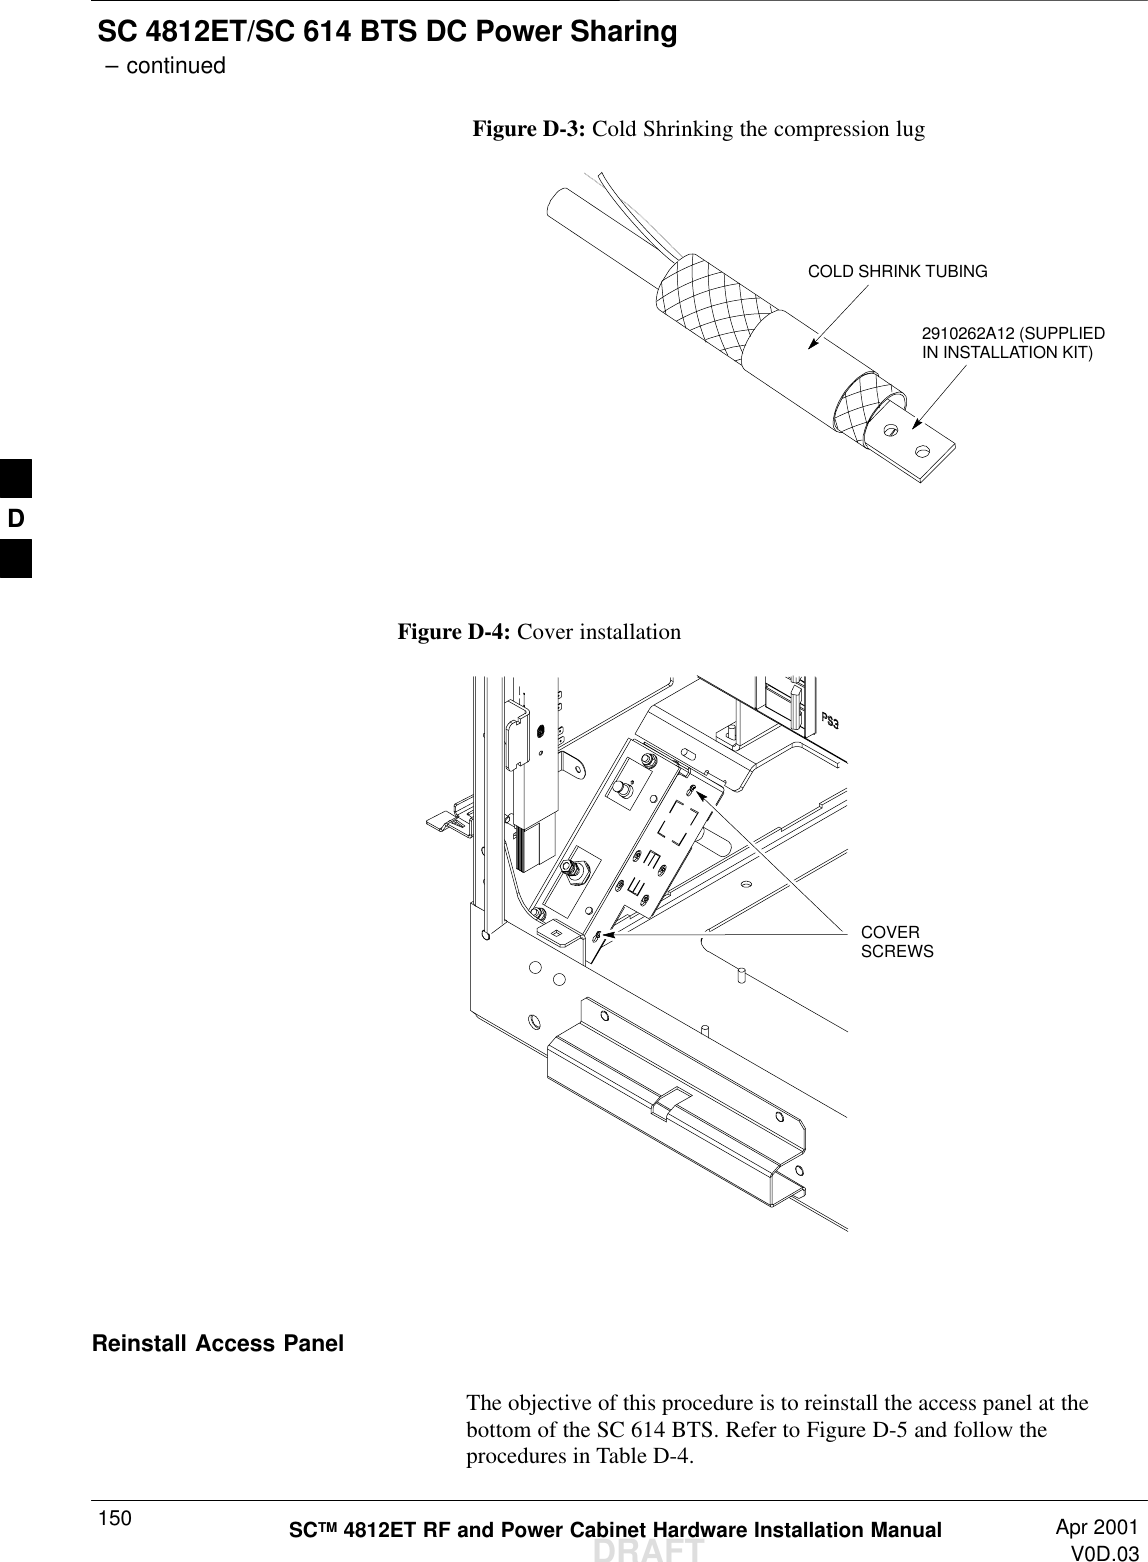 SC 4812ET/SC 614 BTS DC Power Sharing – continuedDRAFTSCTM 4812ET RF and Power Cabinet Hardware Installation Manual Apr 2001V0D.03150Figure D-3: Cold Shrinking the compression lugCOLD SHRINK TUBING2910262A12 (SUPPLIEDIN INSTALLATION KIT)Figure D-4: Cover installationCOVERSCREWSReinstall Access PanelThe objective of this procedure is to reinstall the access panel at thebottom of the SC 614 BTS. Refer to Figure D-5 and follow theprocedures in Table D-4.D